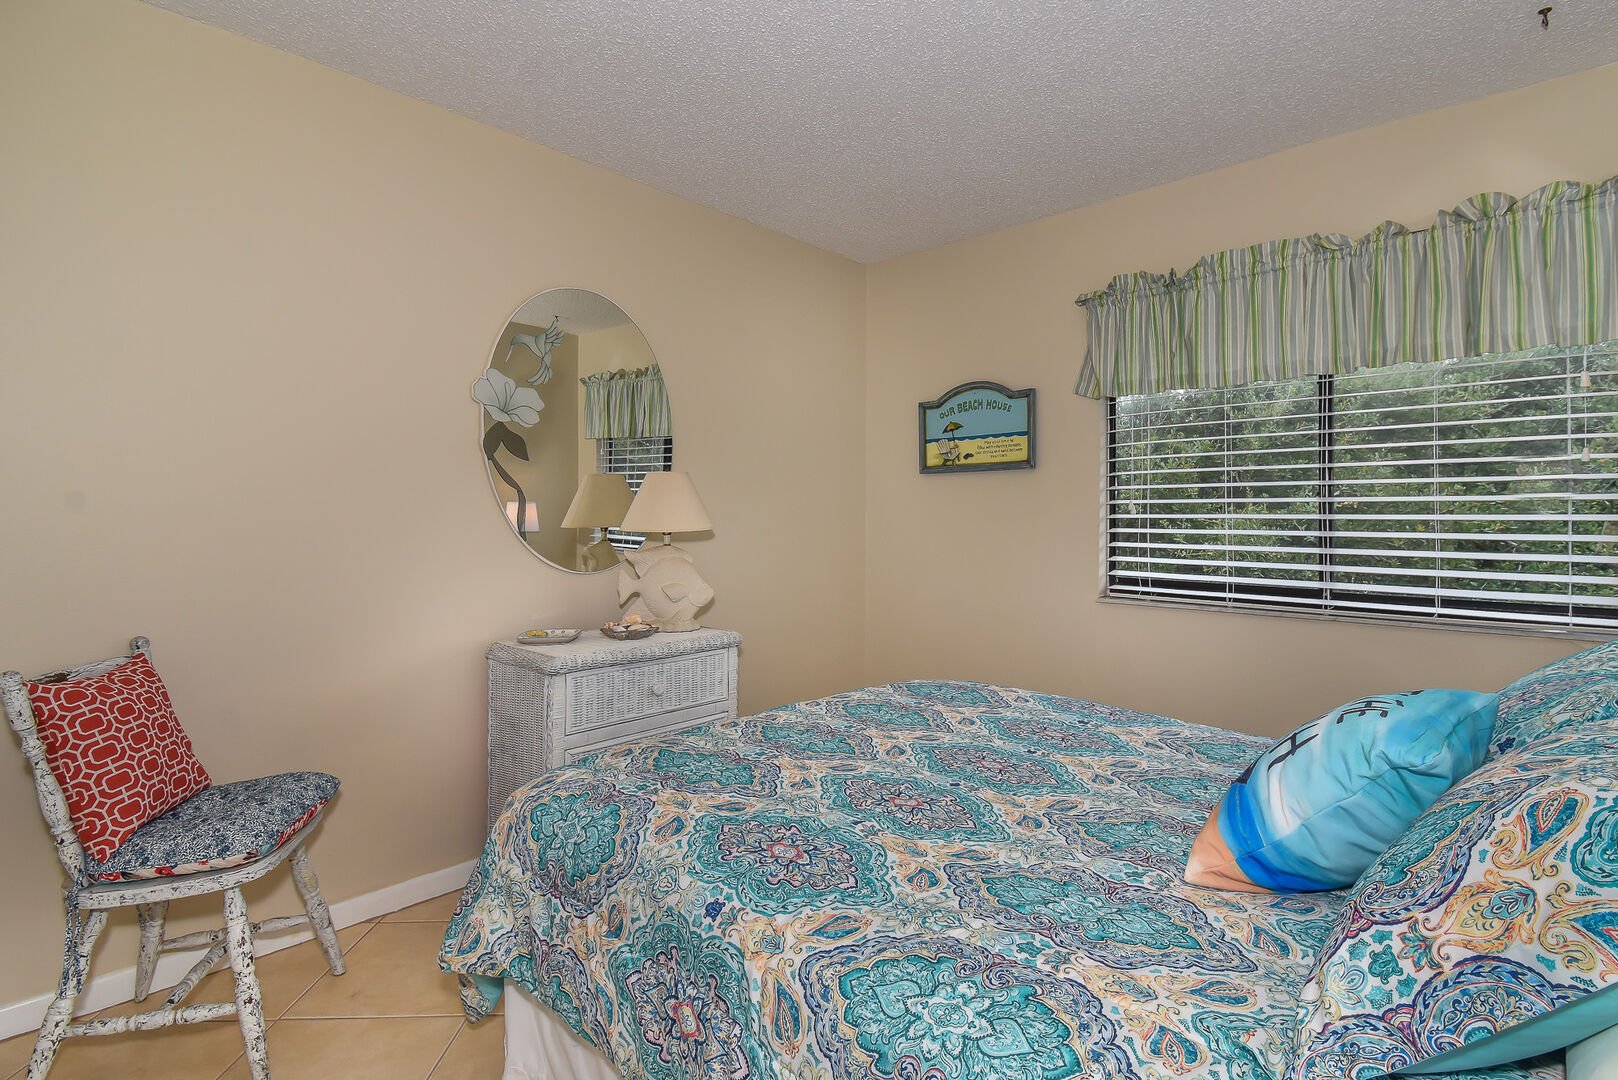 The 2nd bedroom features a queen size bed, flat screen TV and plenty of room to relax.